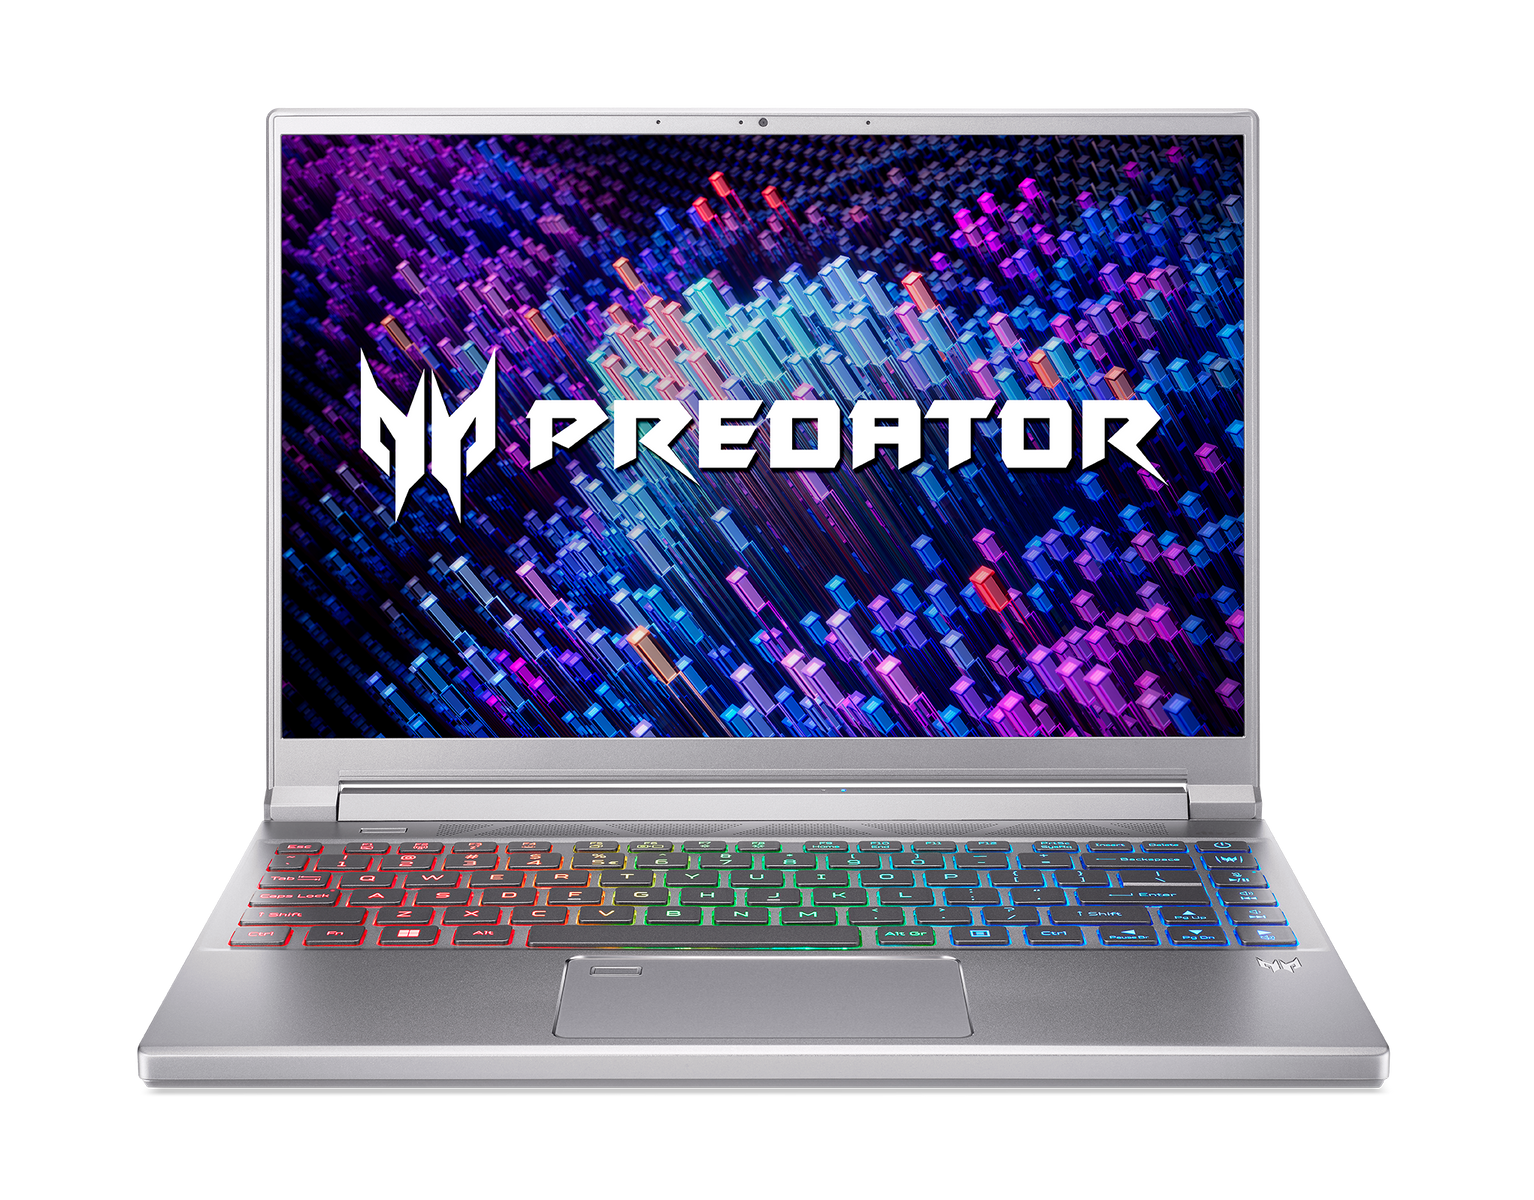 512 S7822977, RAM, Intel® SSD, 14 Display, Prozessor, Zoll Mehrfarbig GB Notebook GB mit i7 Core™ 16 Gaming ACER